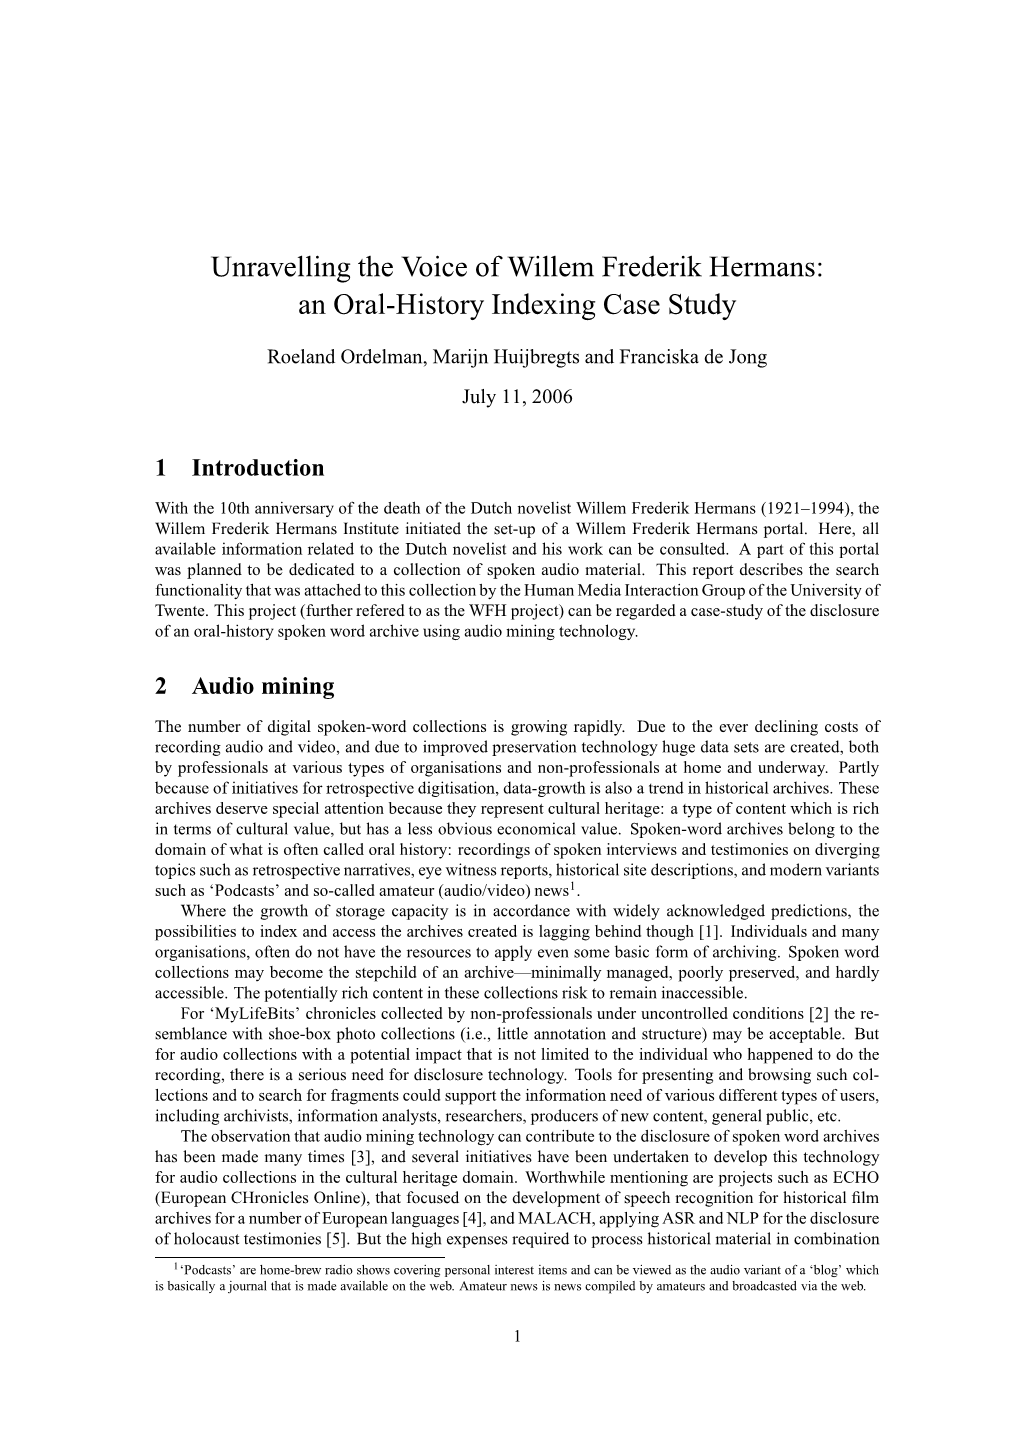 Unravelling the Voice of Willem Frederik Hermans: an Oral-History Indexing Case Study